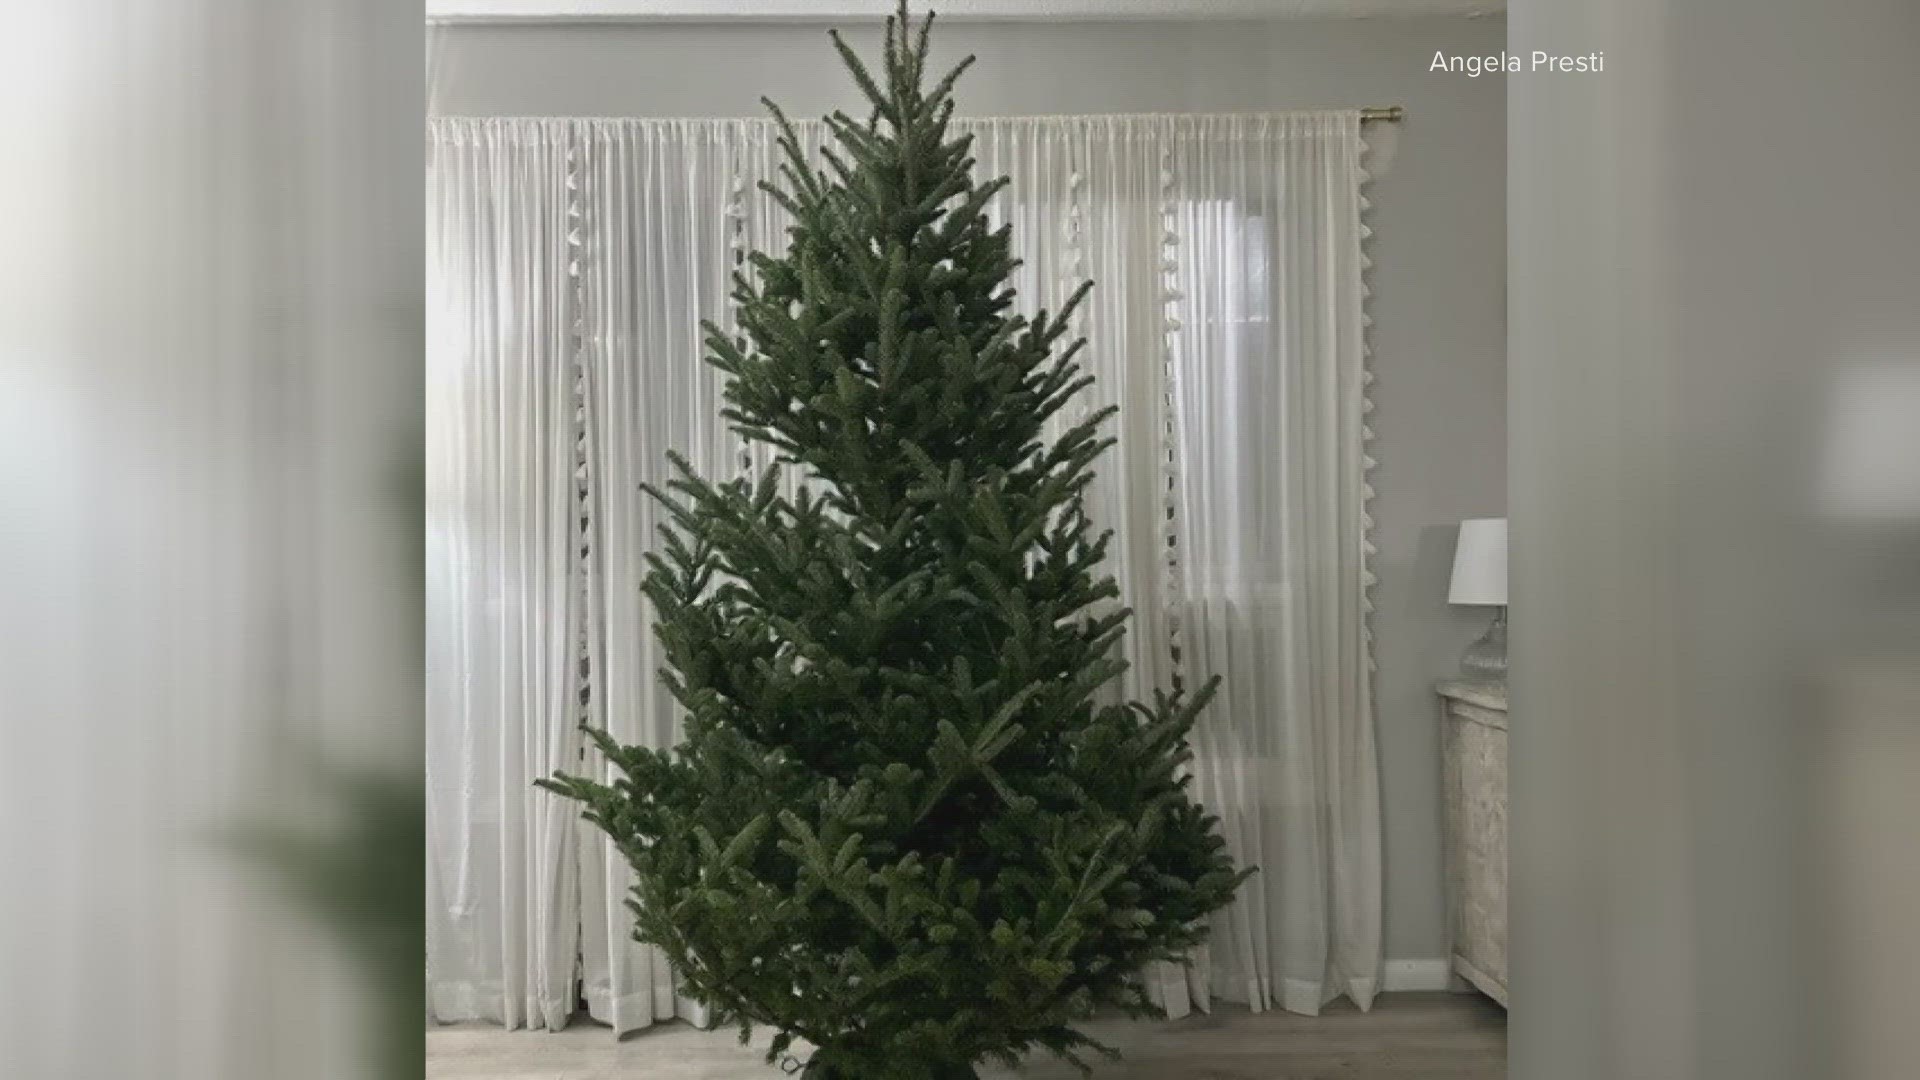 A Parma woman went into anaphylactic shock after exposure to her first real Christmas tree. There is actually a condition called 'Christmas Tree Syndrome.'